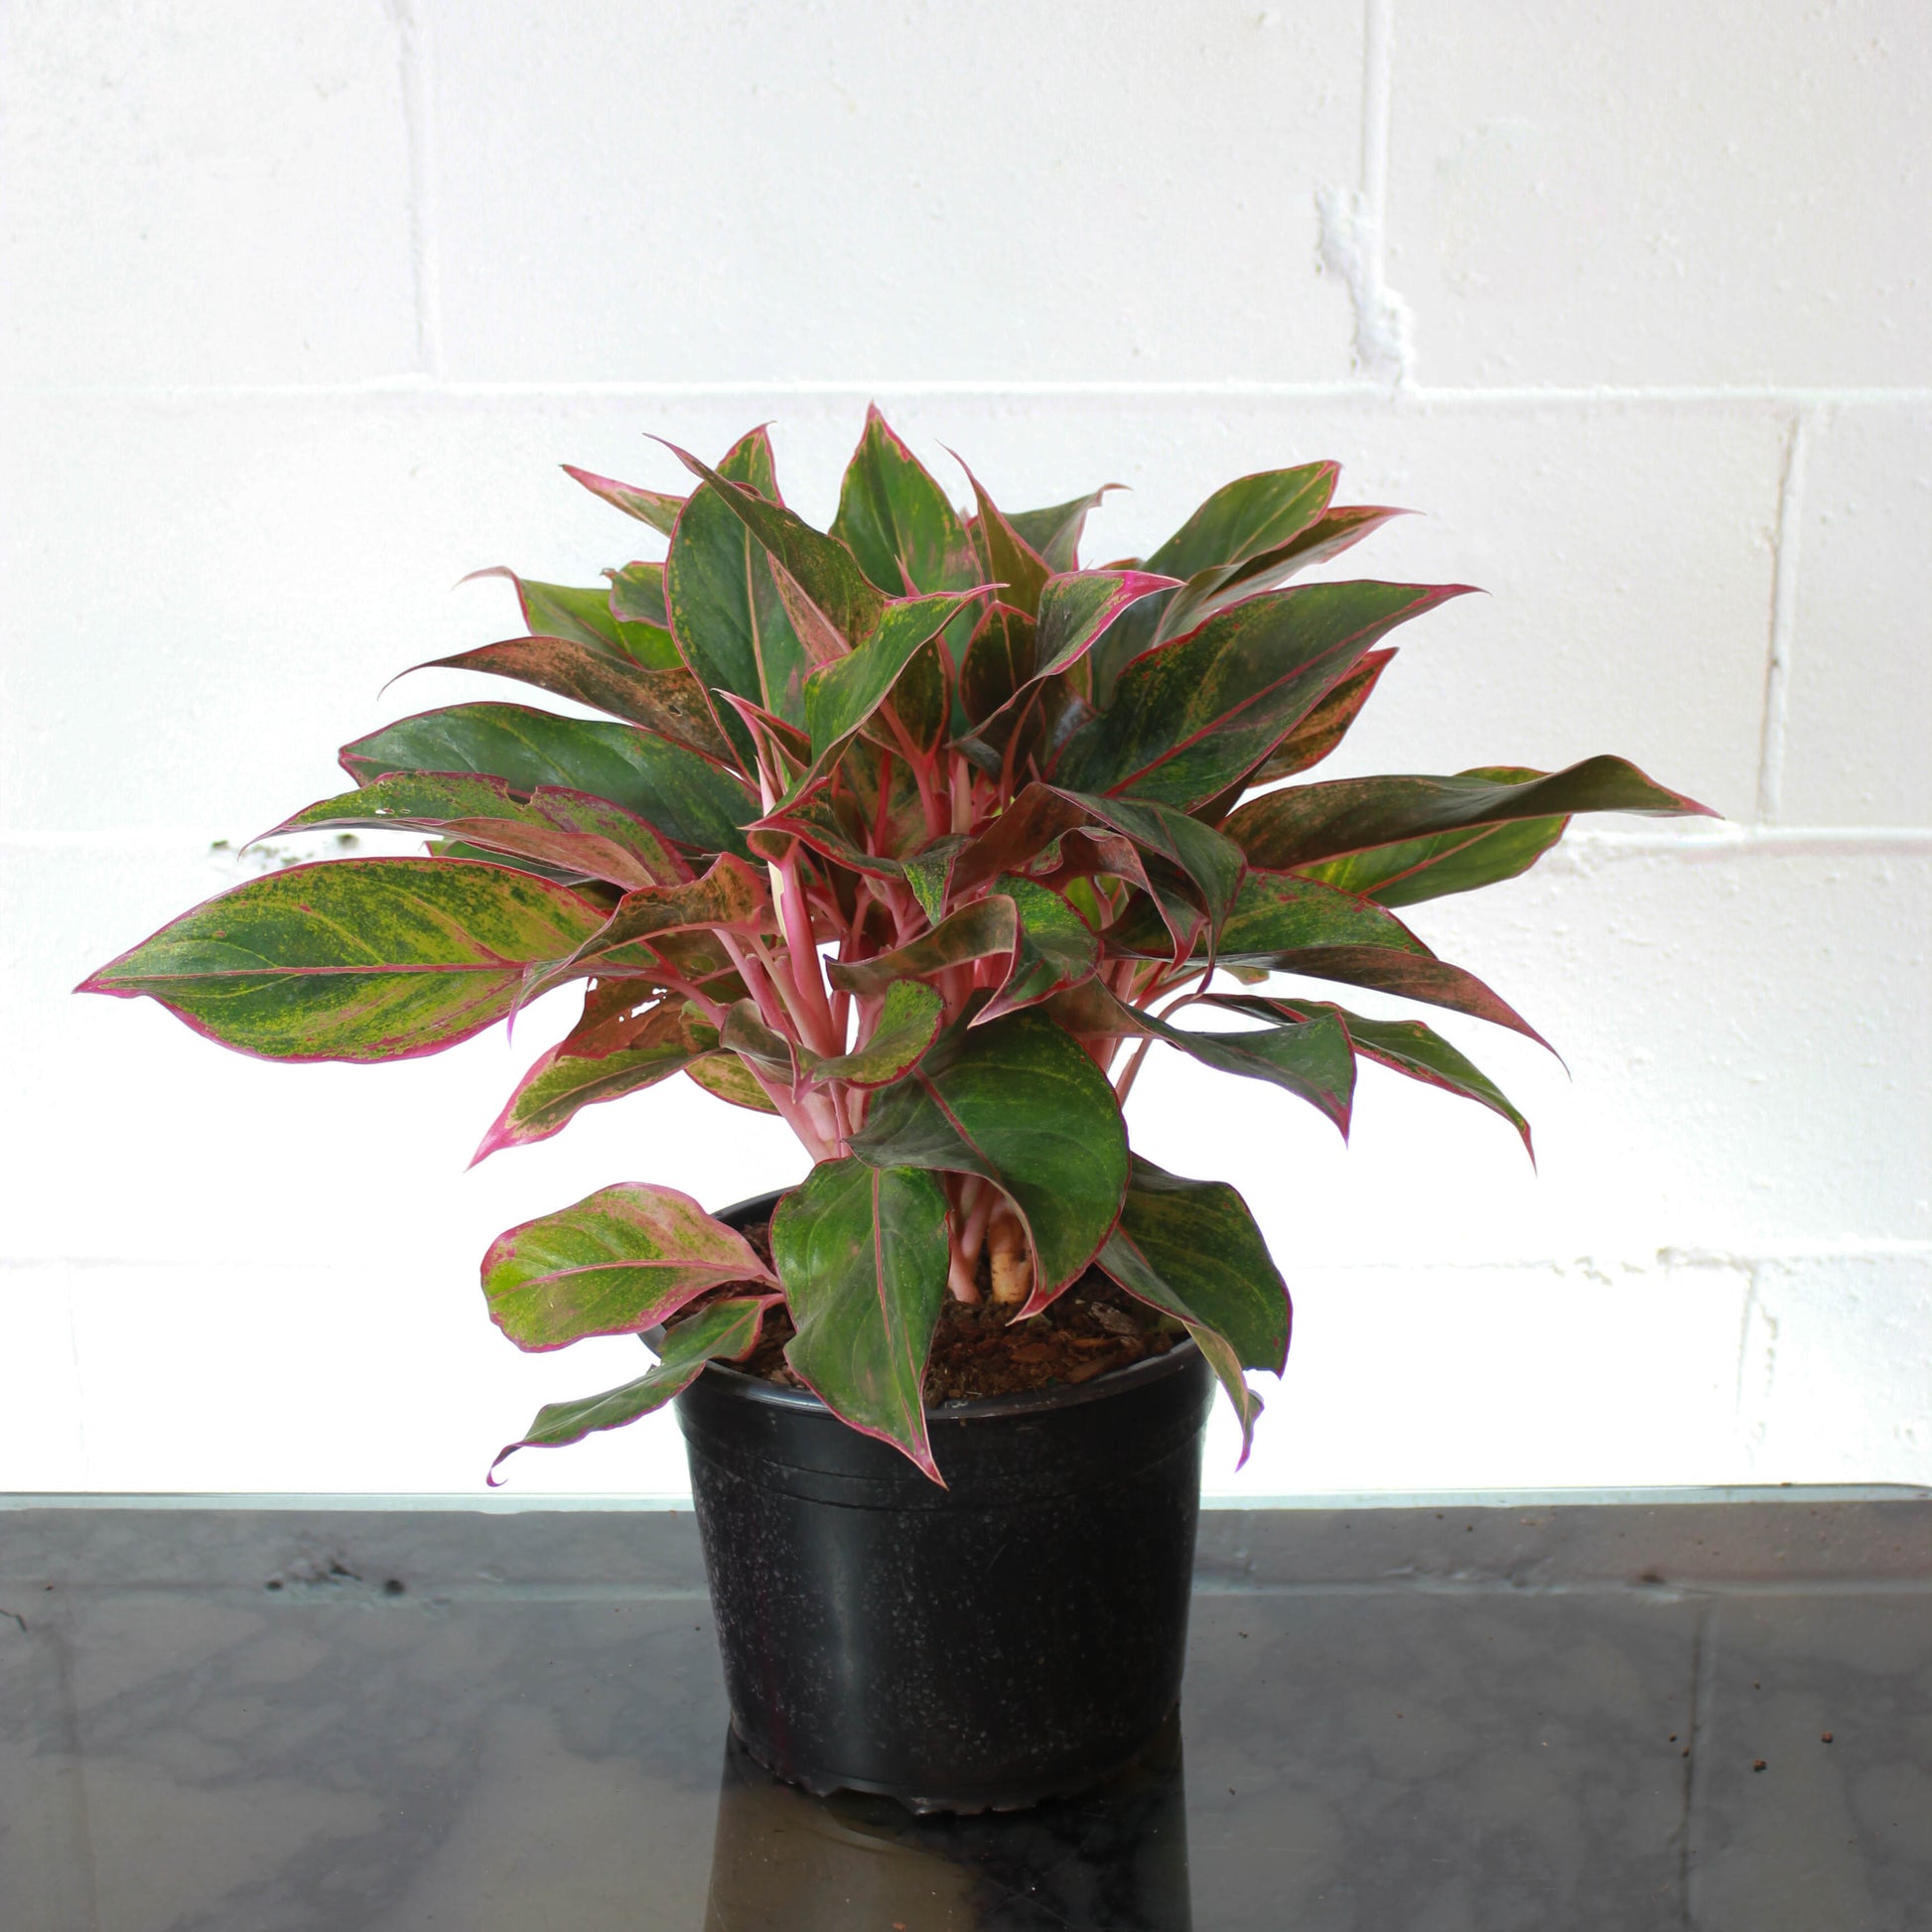 Chinese evergreen, Philippine evergreen (Aglaonema) in a 8 inch pot. Indoor plant for sale by Promise Supply for delivery and pickup in Toronto